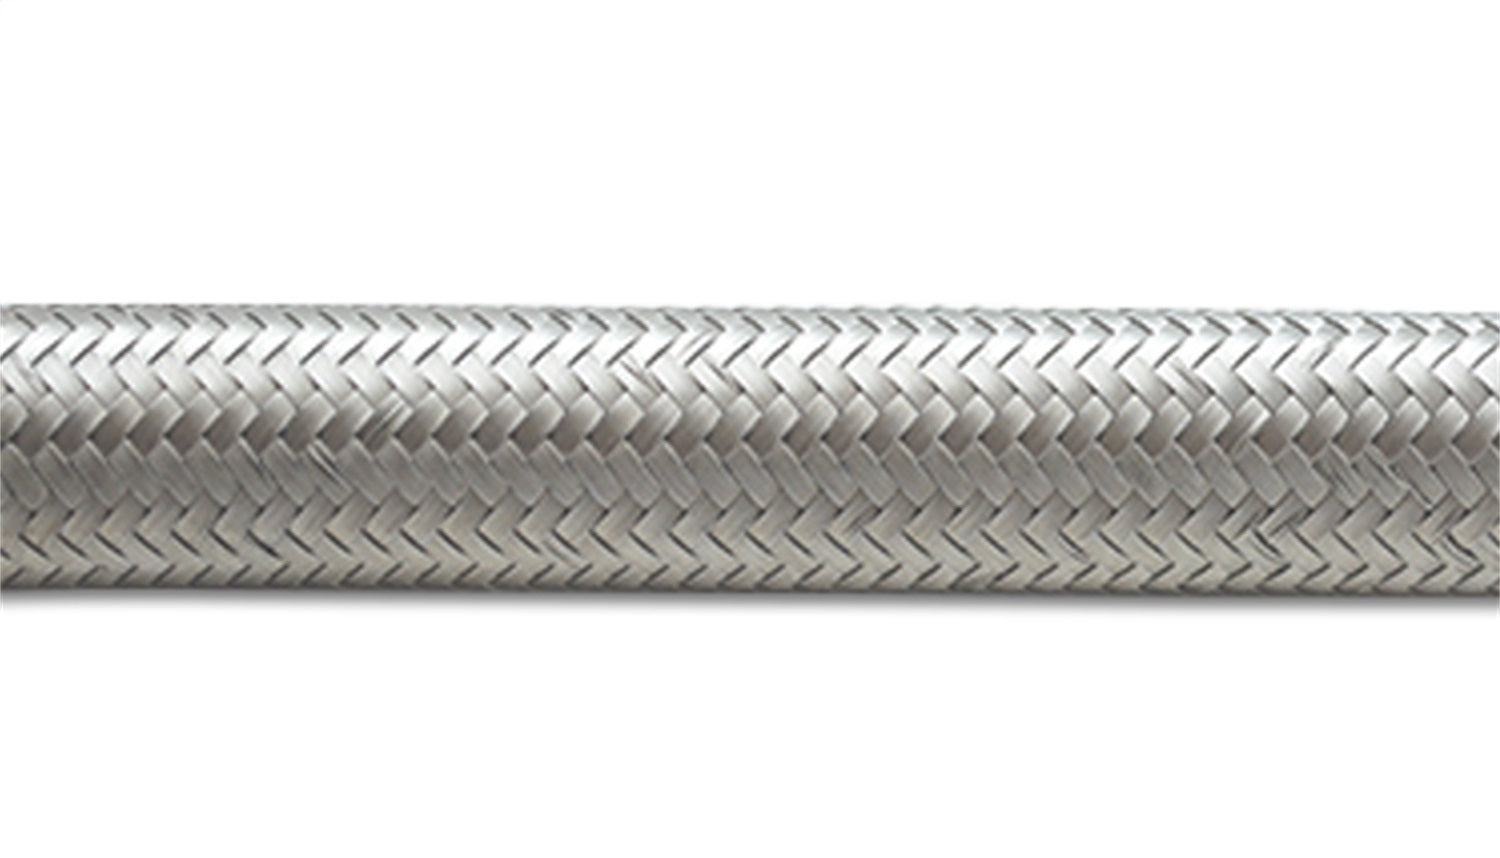 Vibrant Performance 20ft Roll of Stainless Steel Braided Flex Hose; AN Size: -12; Hose ID 0.68"